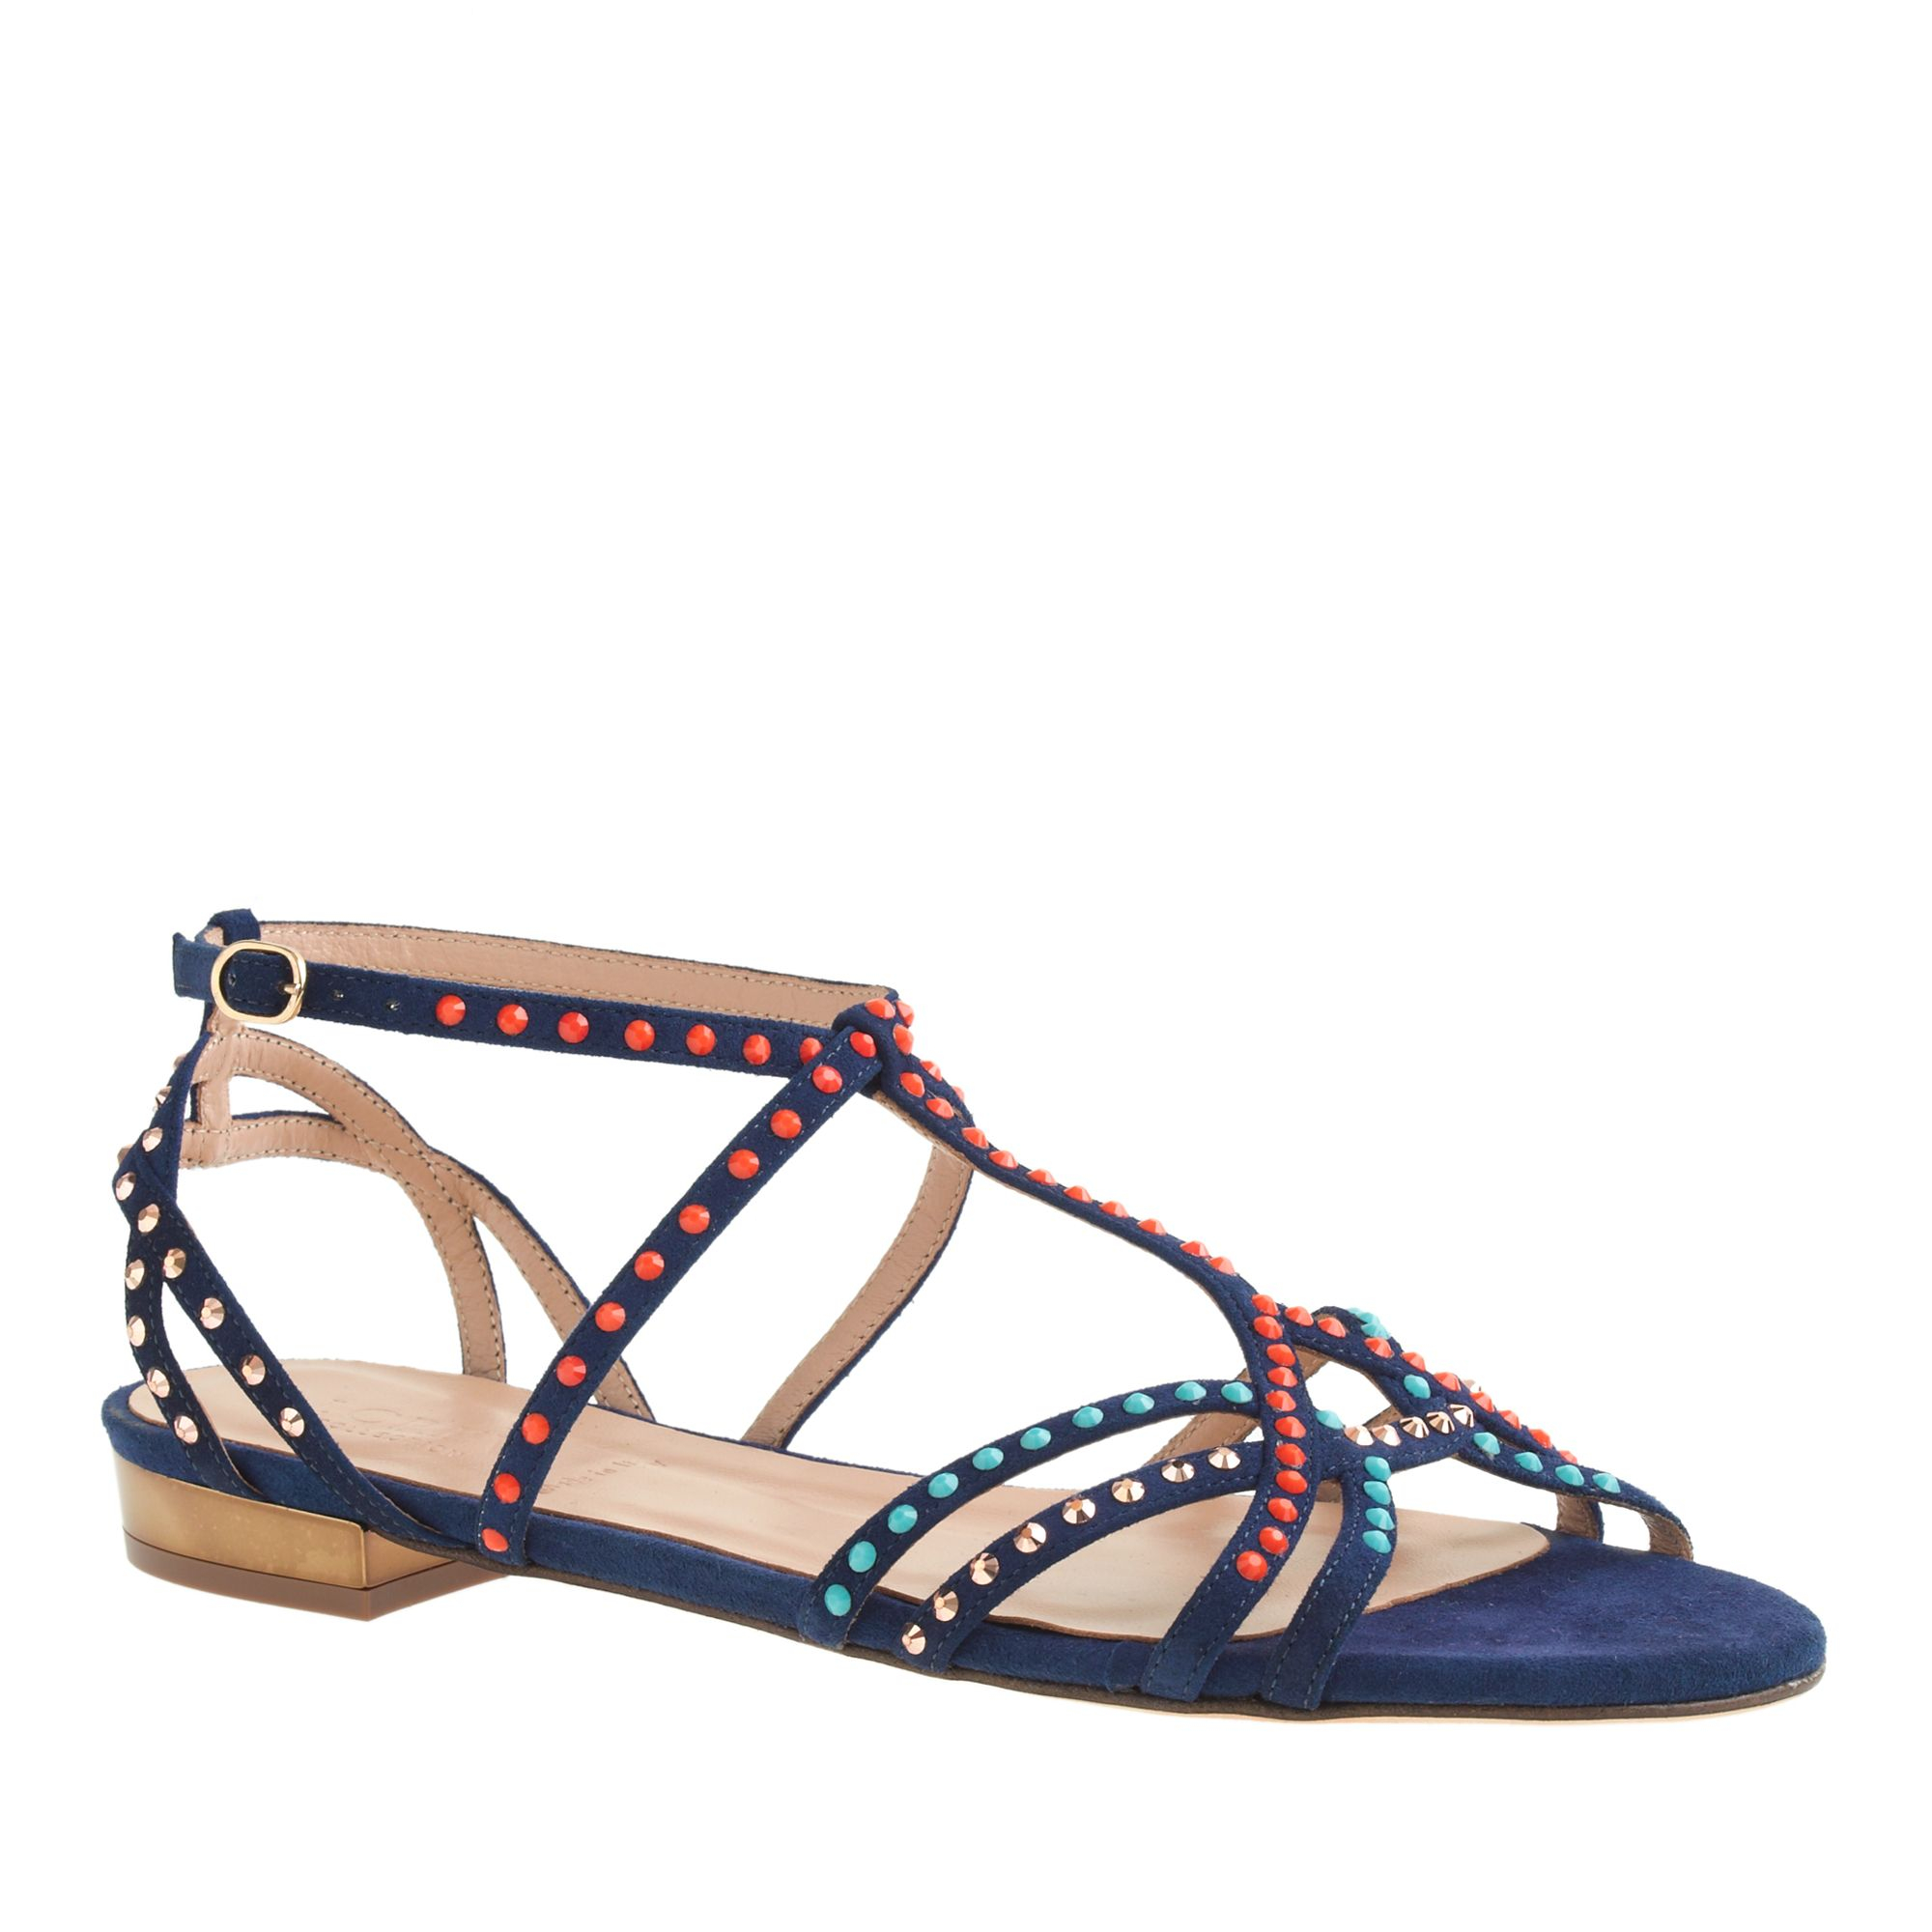 J.crew Collection Millie Crystal Sandals in Blue | Lyst